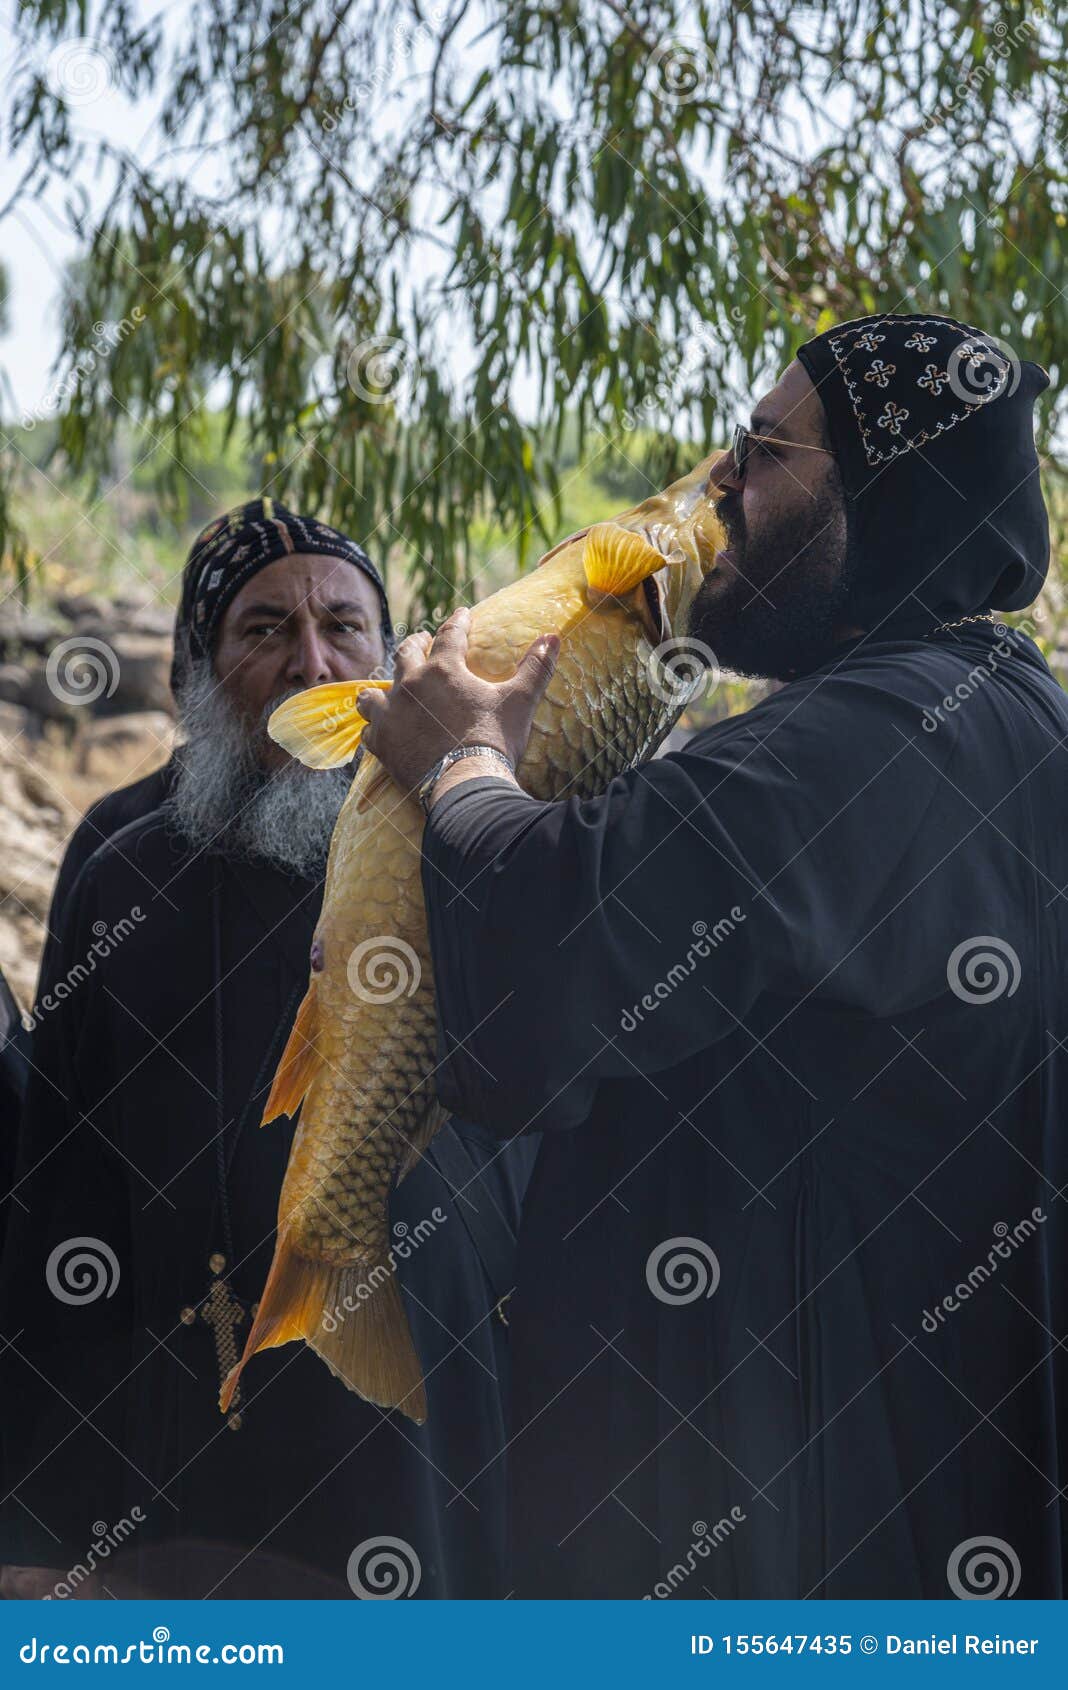 Coptic Monk At Tabgha Church Beside Sea Of Galilee Holding A Big Fish Editorial Image Image Of Landmark Christ 155647435